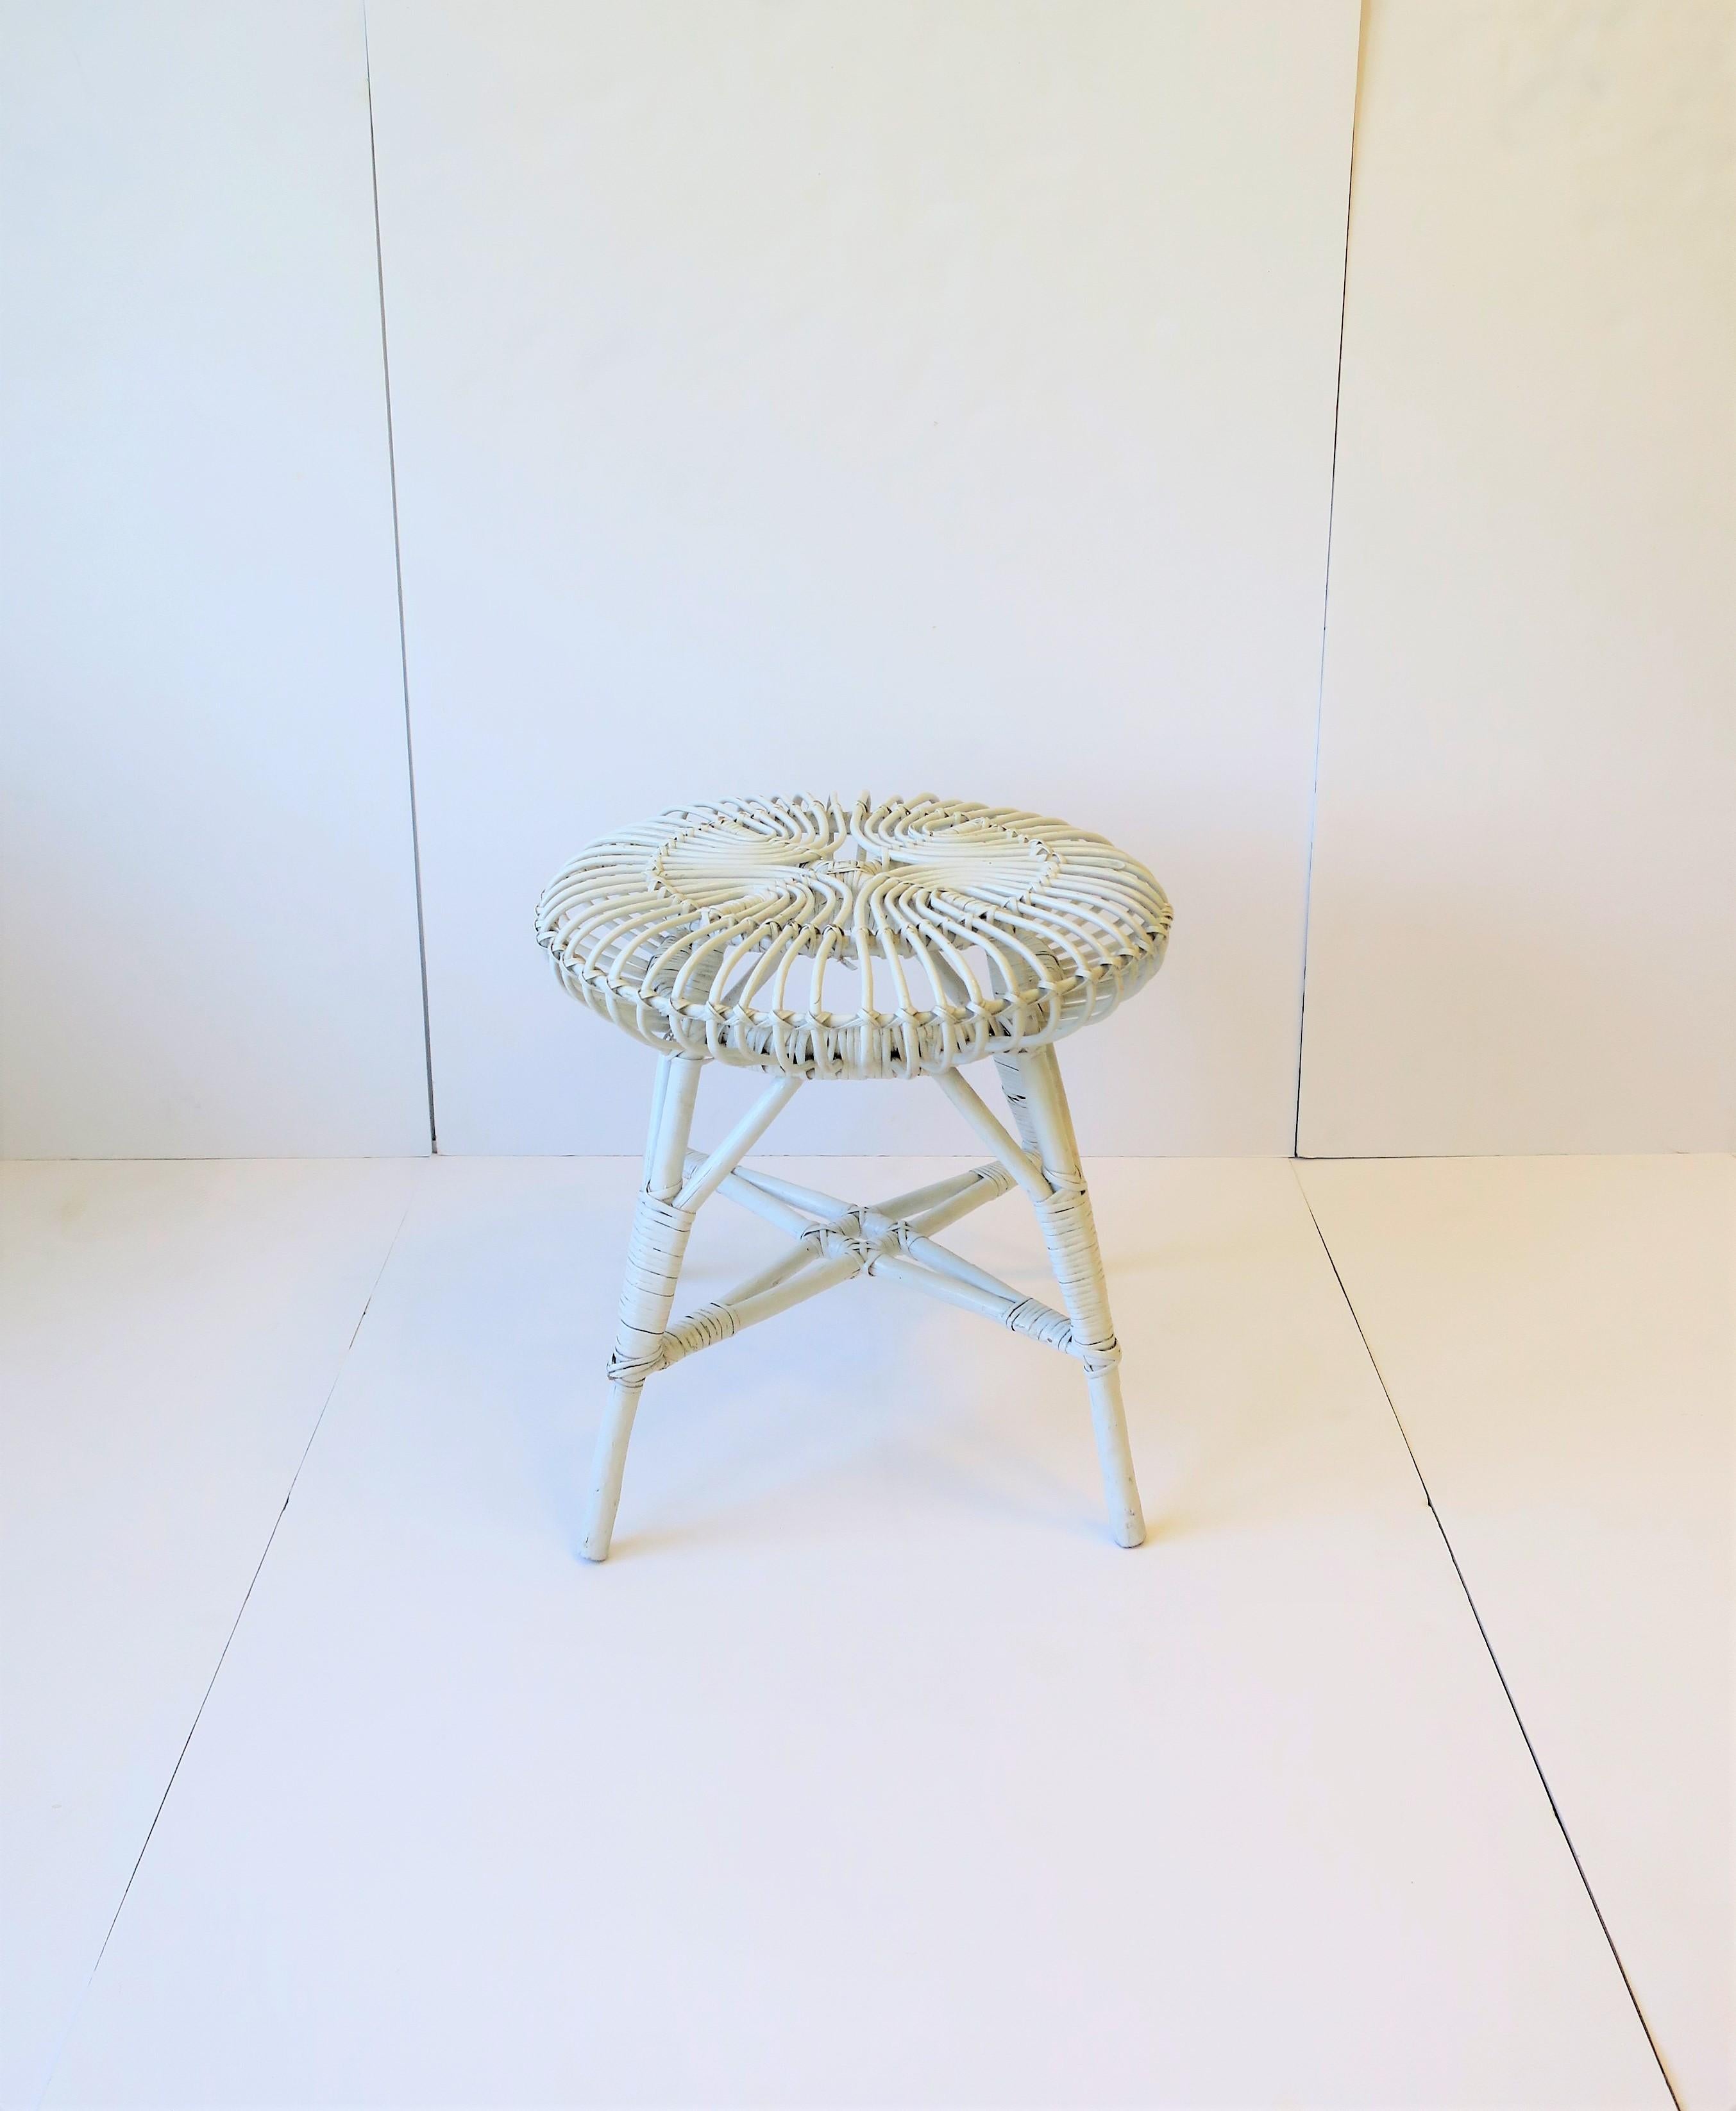 A round white wicker rattan stool in the style of Italian designer Franco Albini, Midcentury Modern design period, circa mid-20th century, perhaps from Europe/Italy. Piece works as a stool, footstool, or as a side/drinks table providing there's a